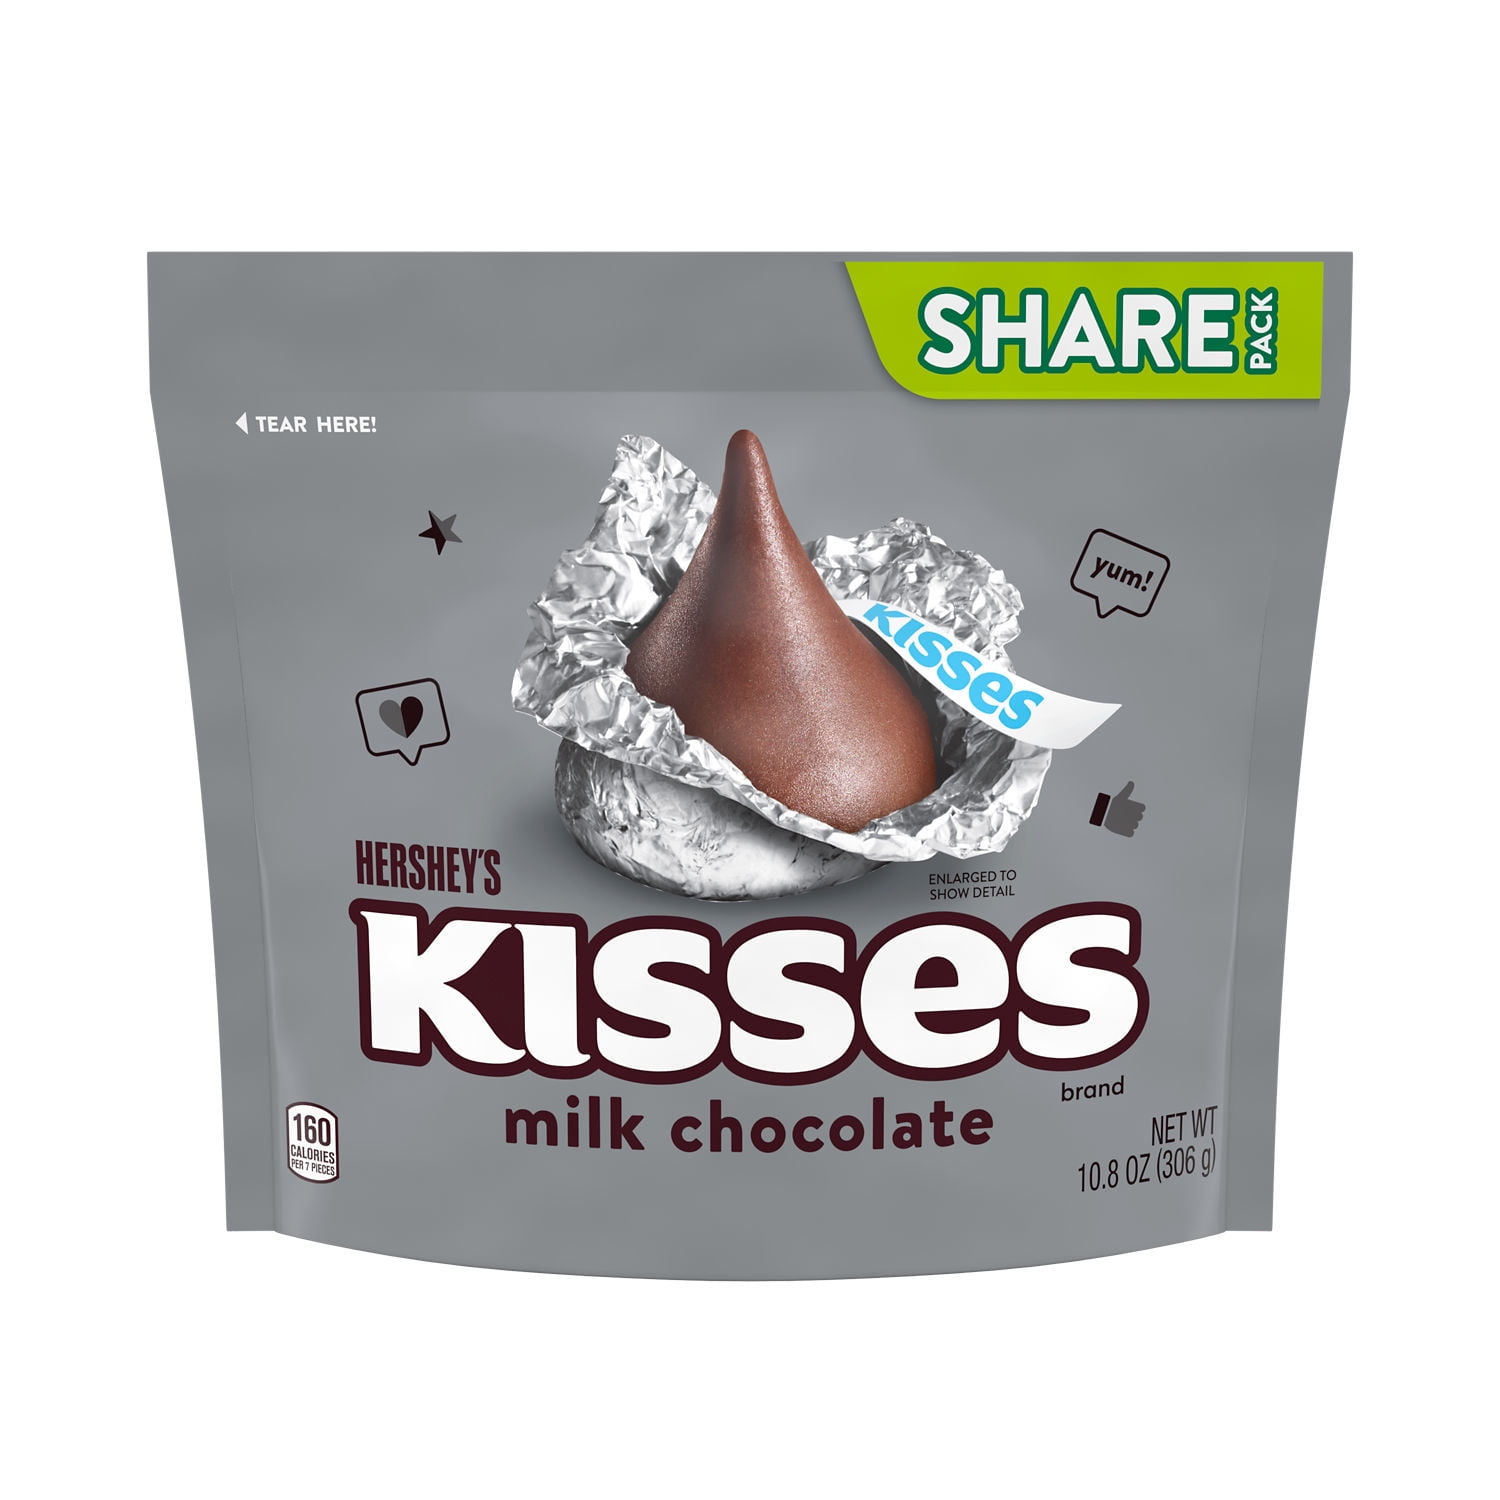 HERSHEY'S KISSES Milk Chocolate Silver foil, Easter Candy Share Pack, 10.8 oz